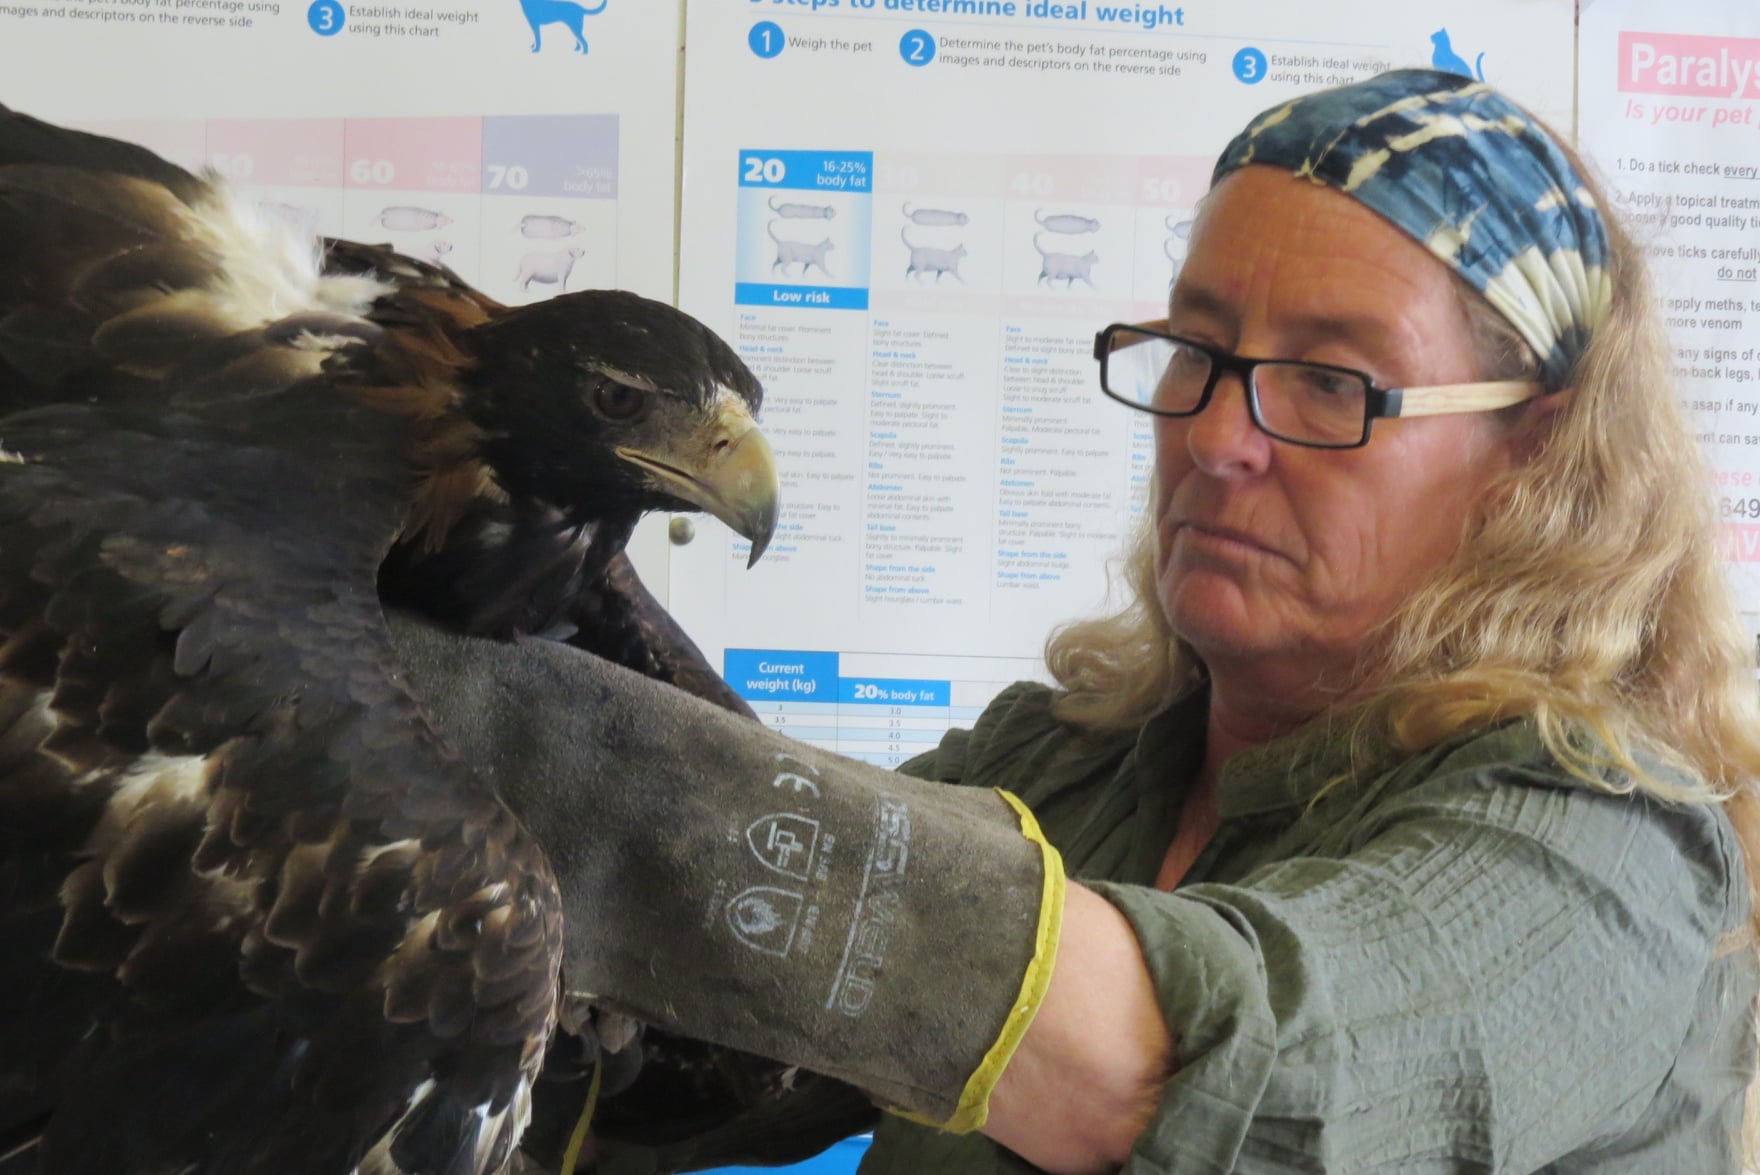 Wedge-tailed eagle survived after possibly being shot from the sky